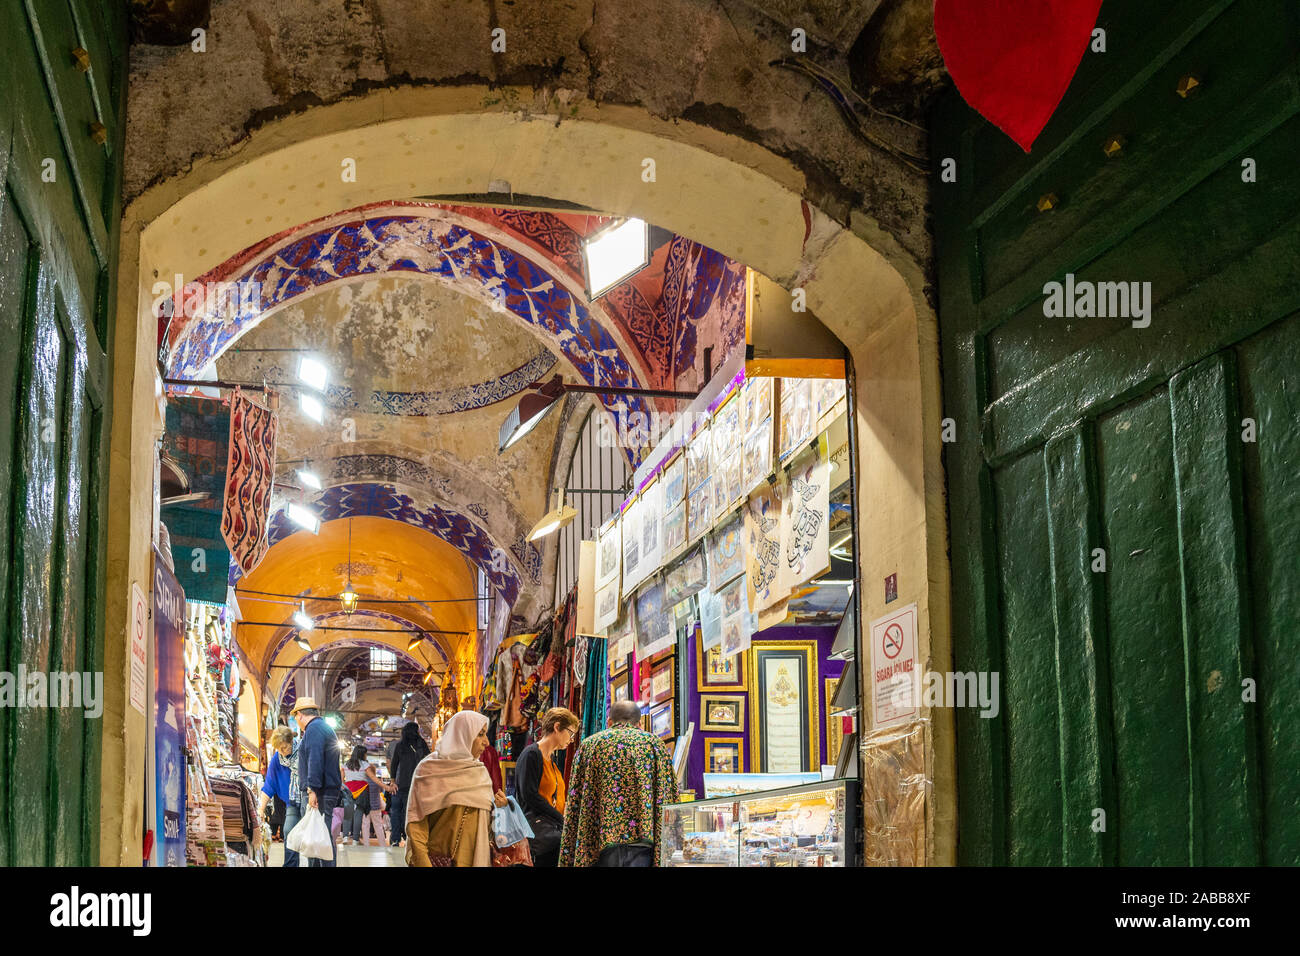 One of the many entrances to the Grand Bazaar in Istanbul, one of the largest and oldest covered markets in the world. Stock Photo